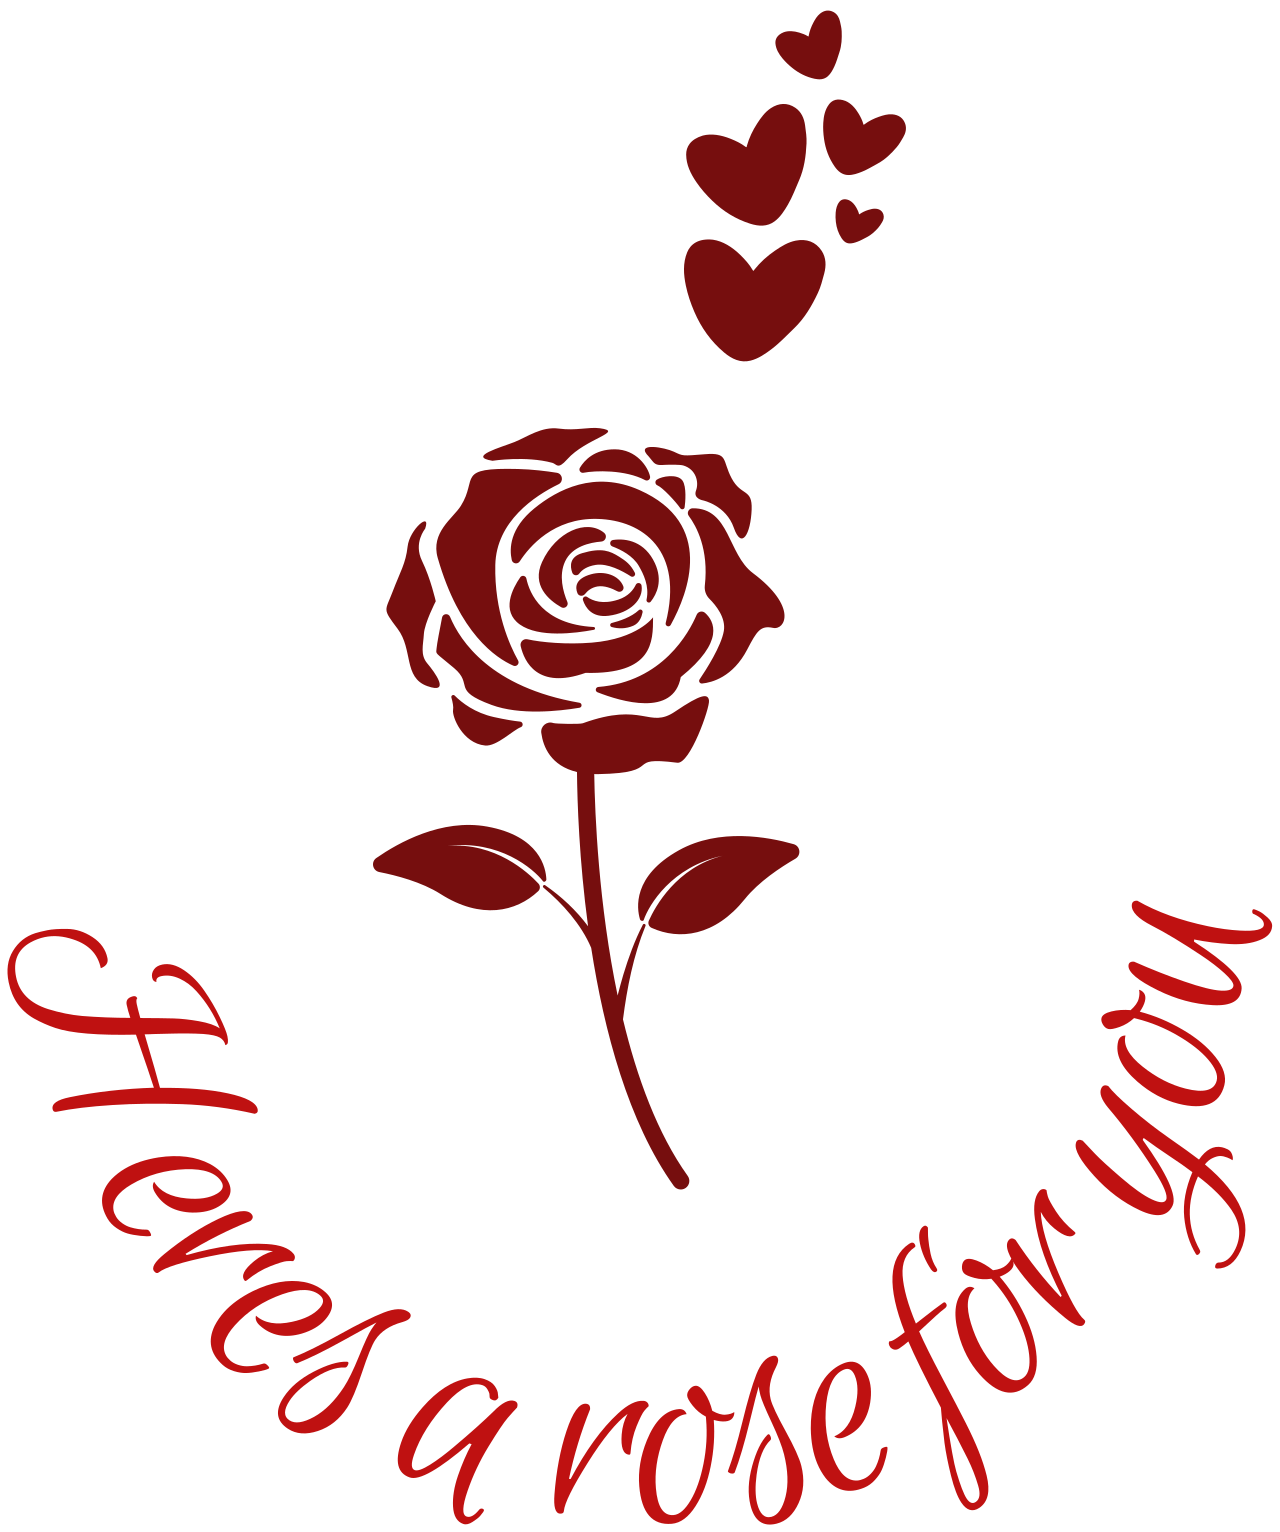 Heres a rose for you's logo